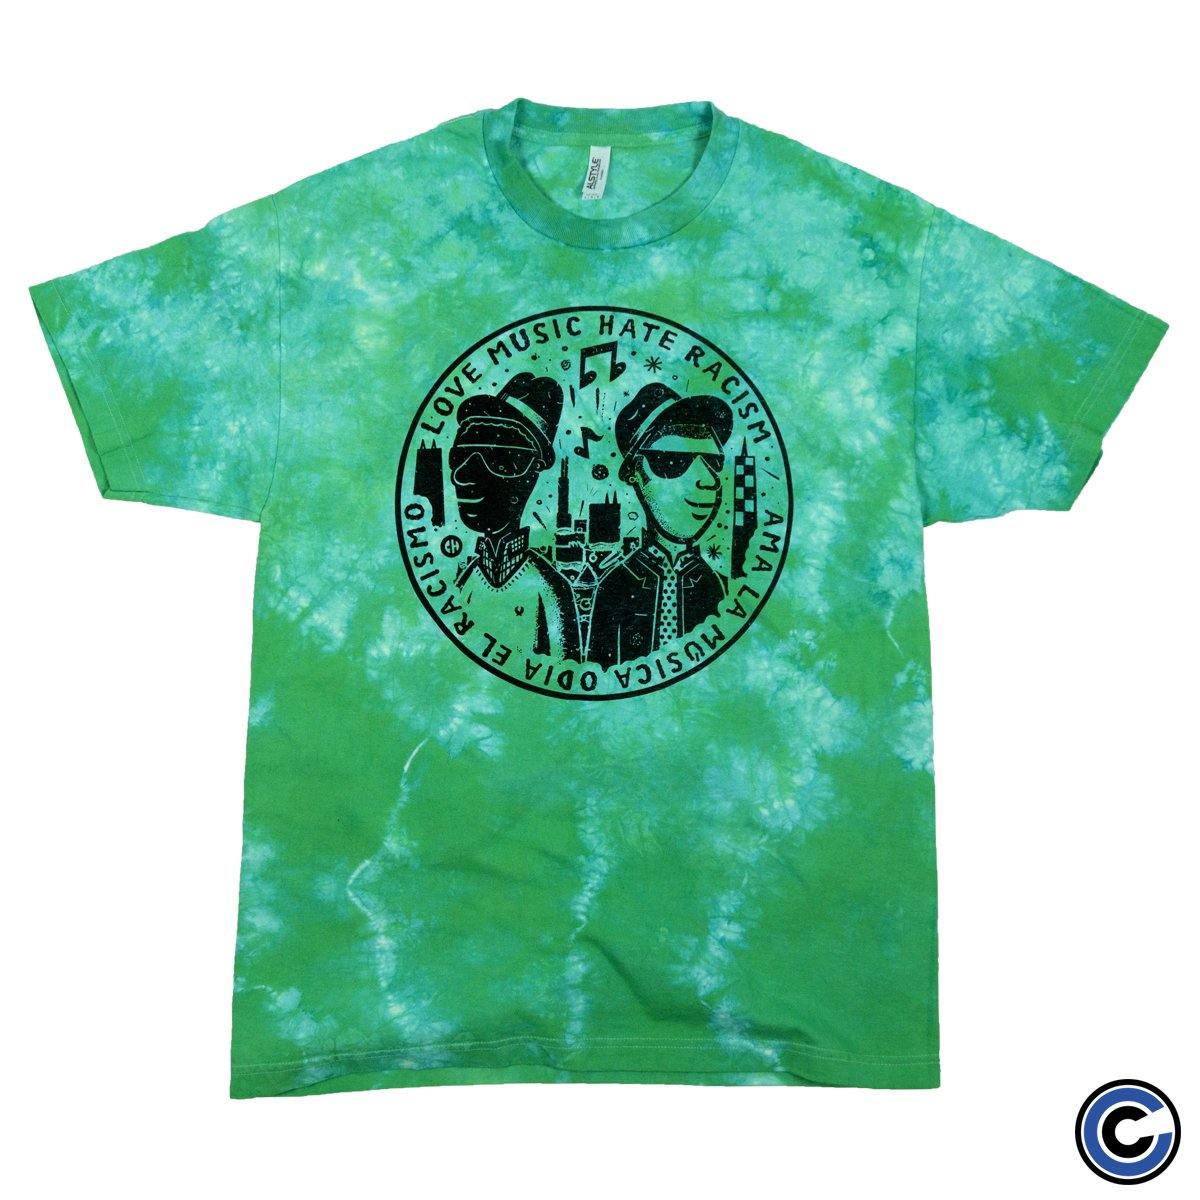 Buy – "Racism Is Ignorance" Charity Tie-Dye Shirt – Band & Music Merch – Cold Cuts Merch